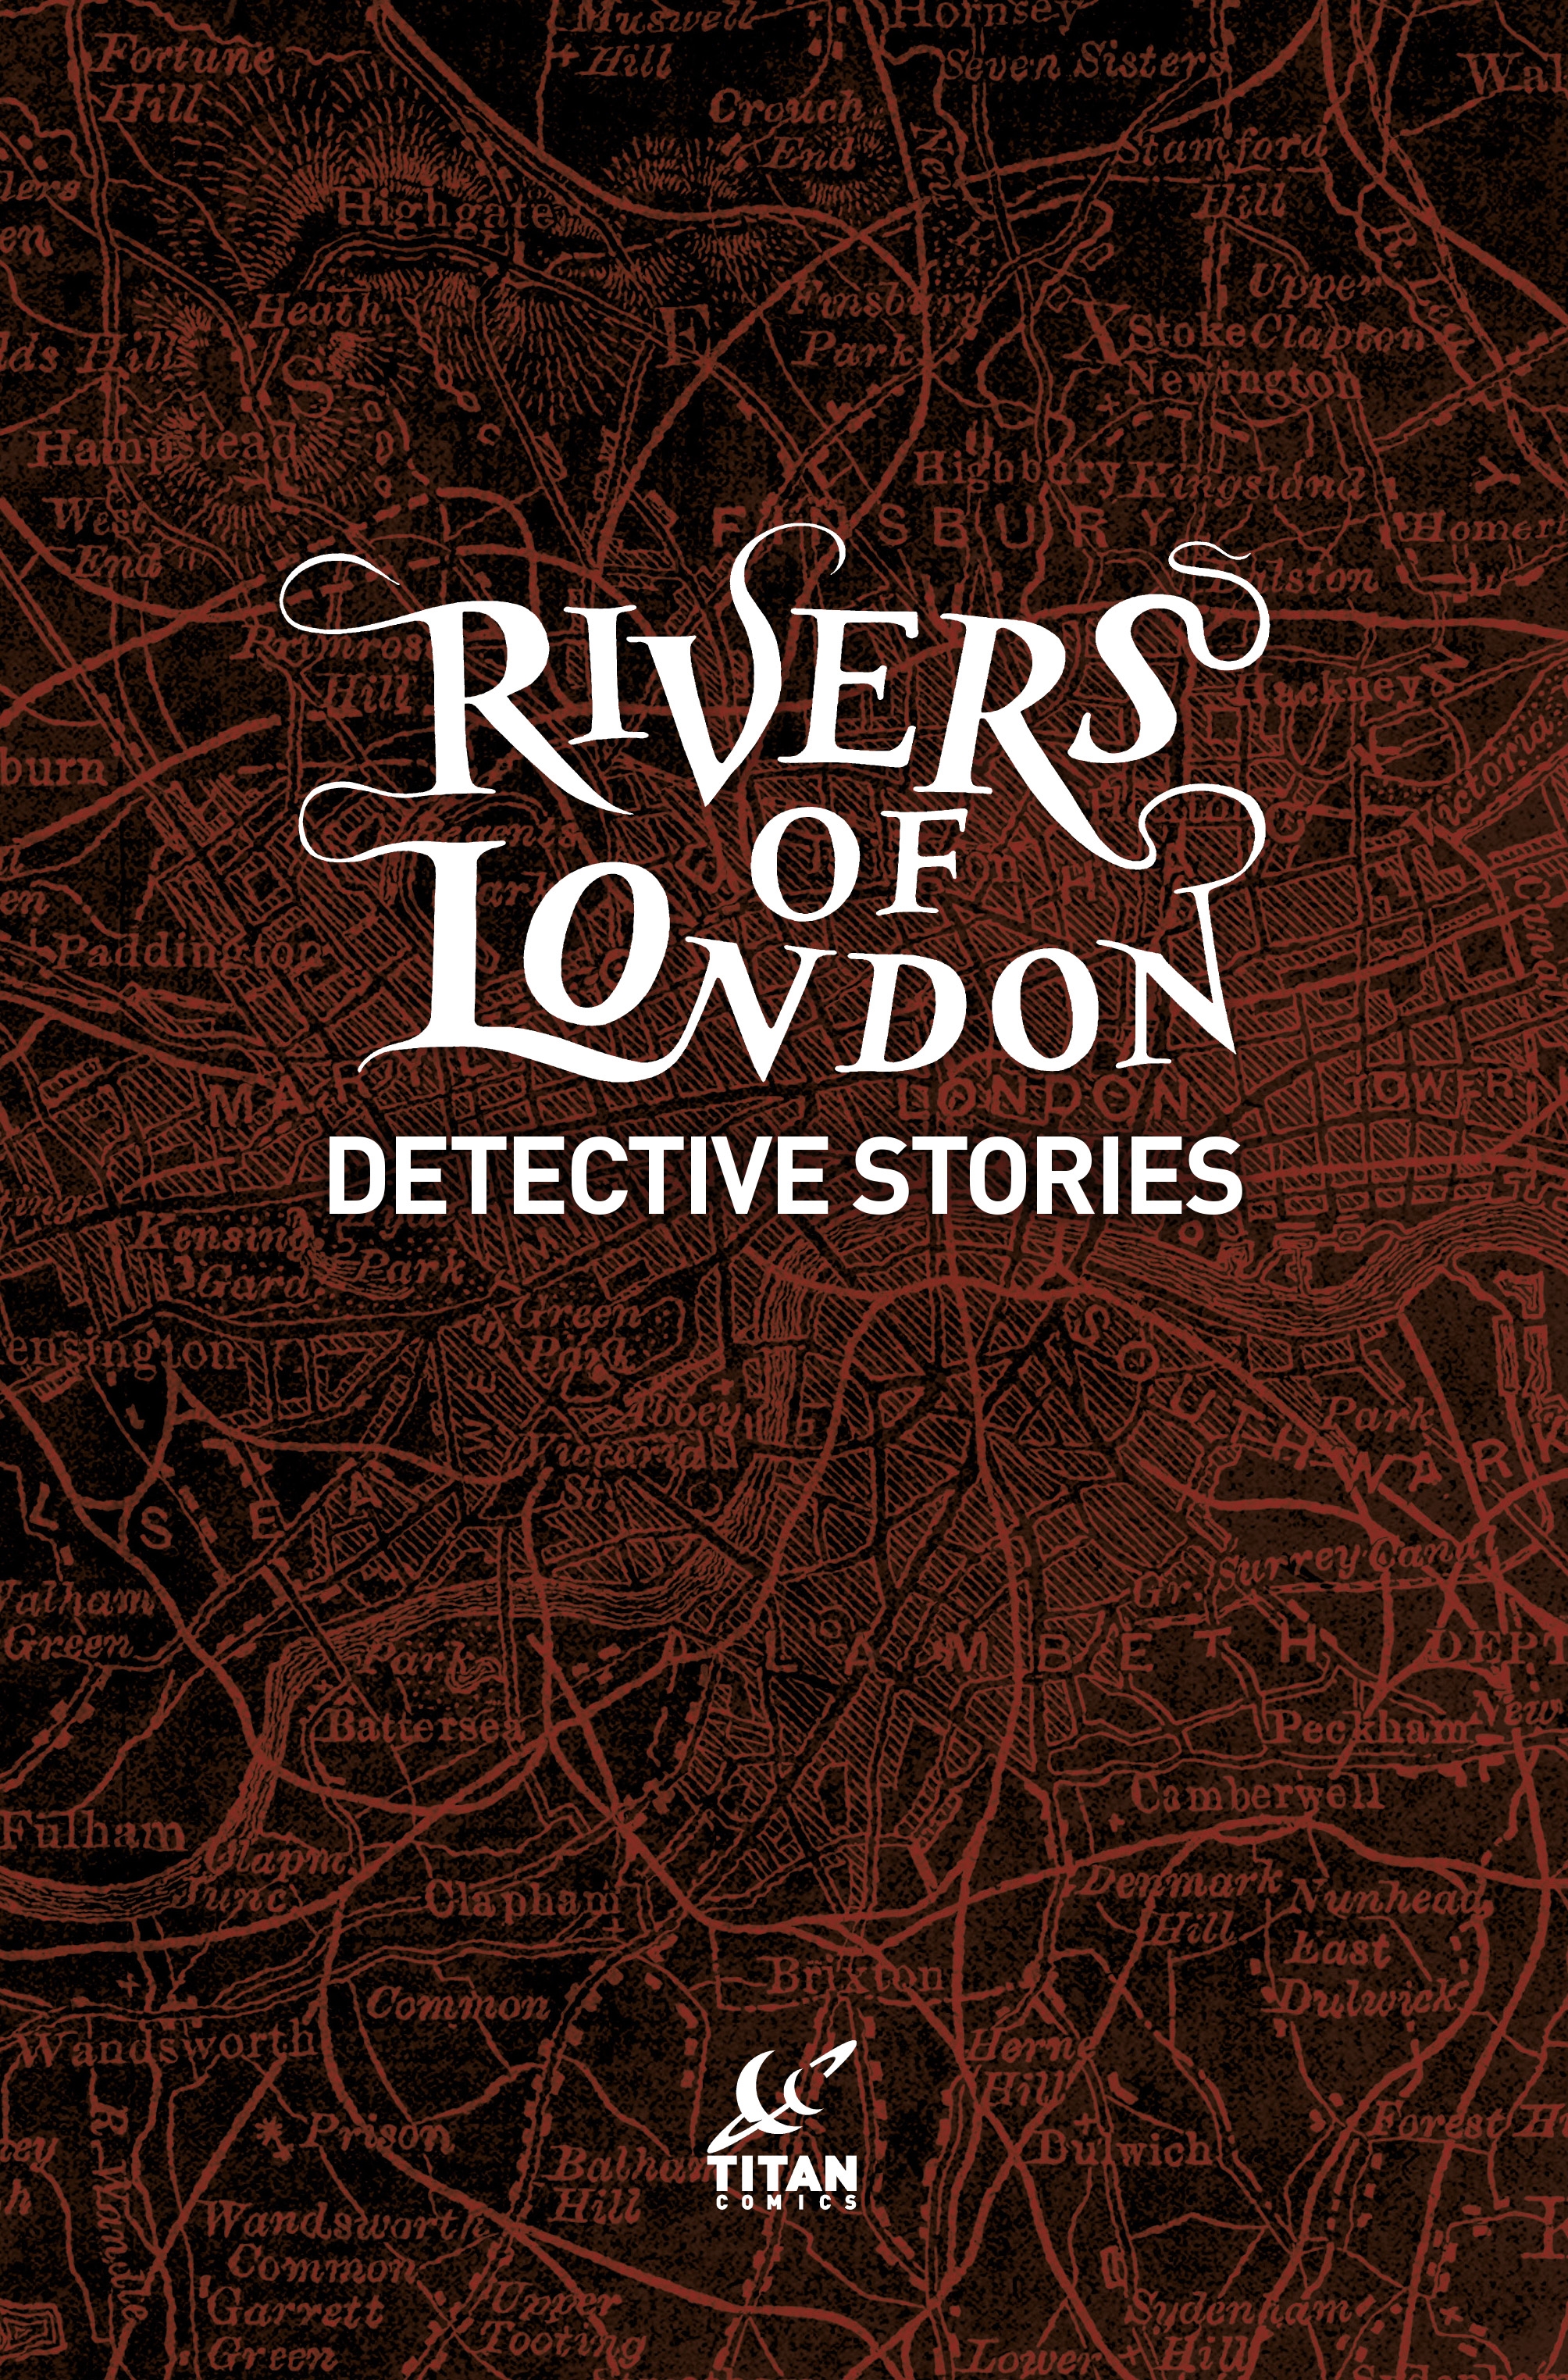 Read online Rivers of London: Detective Stories comic -  Issue # TPB - 2